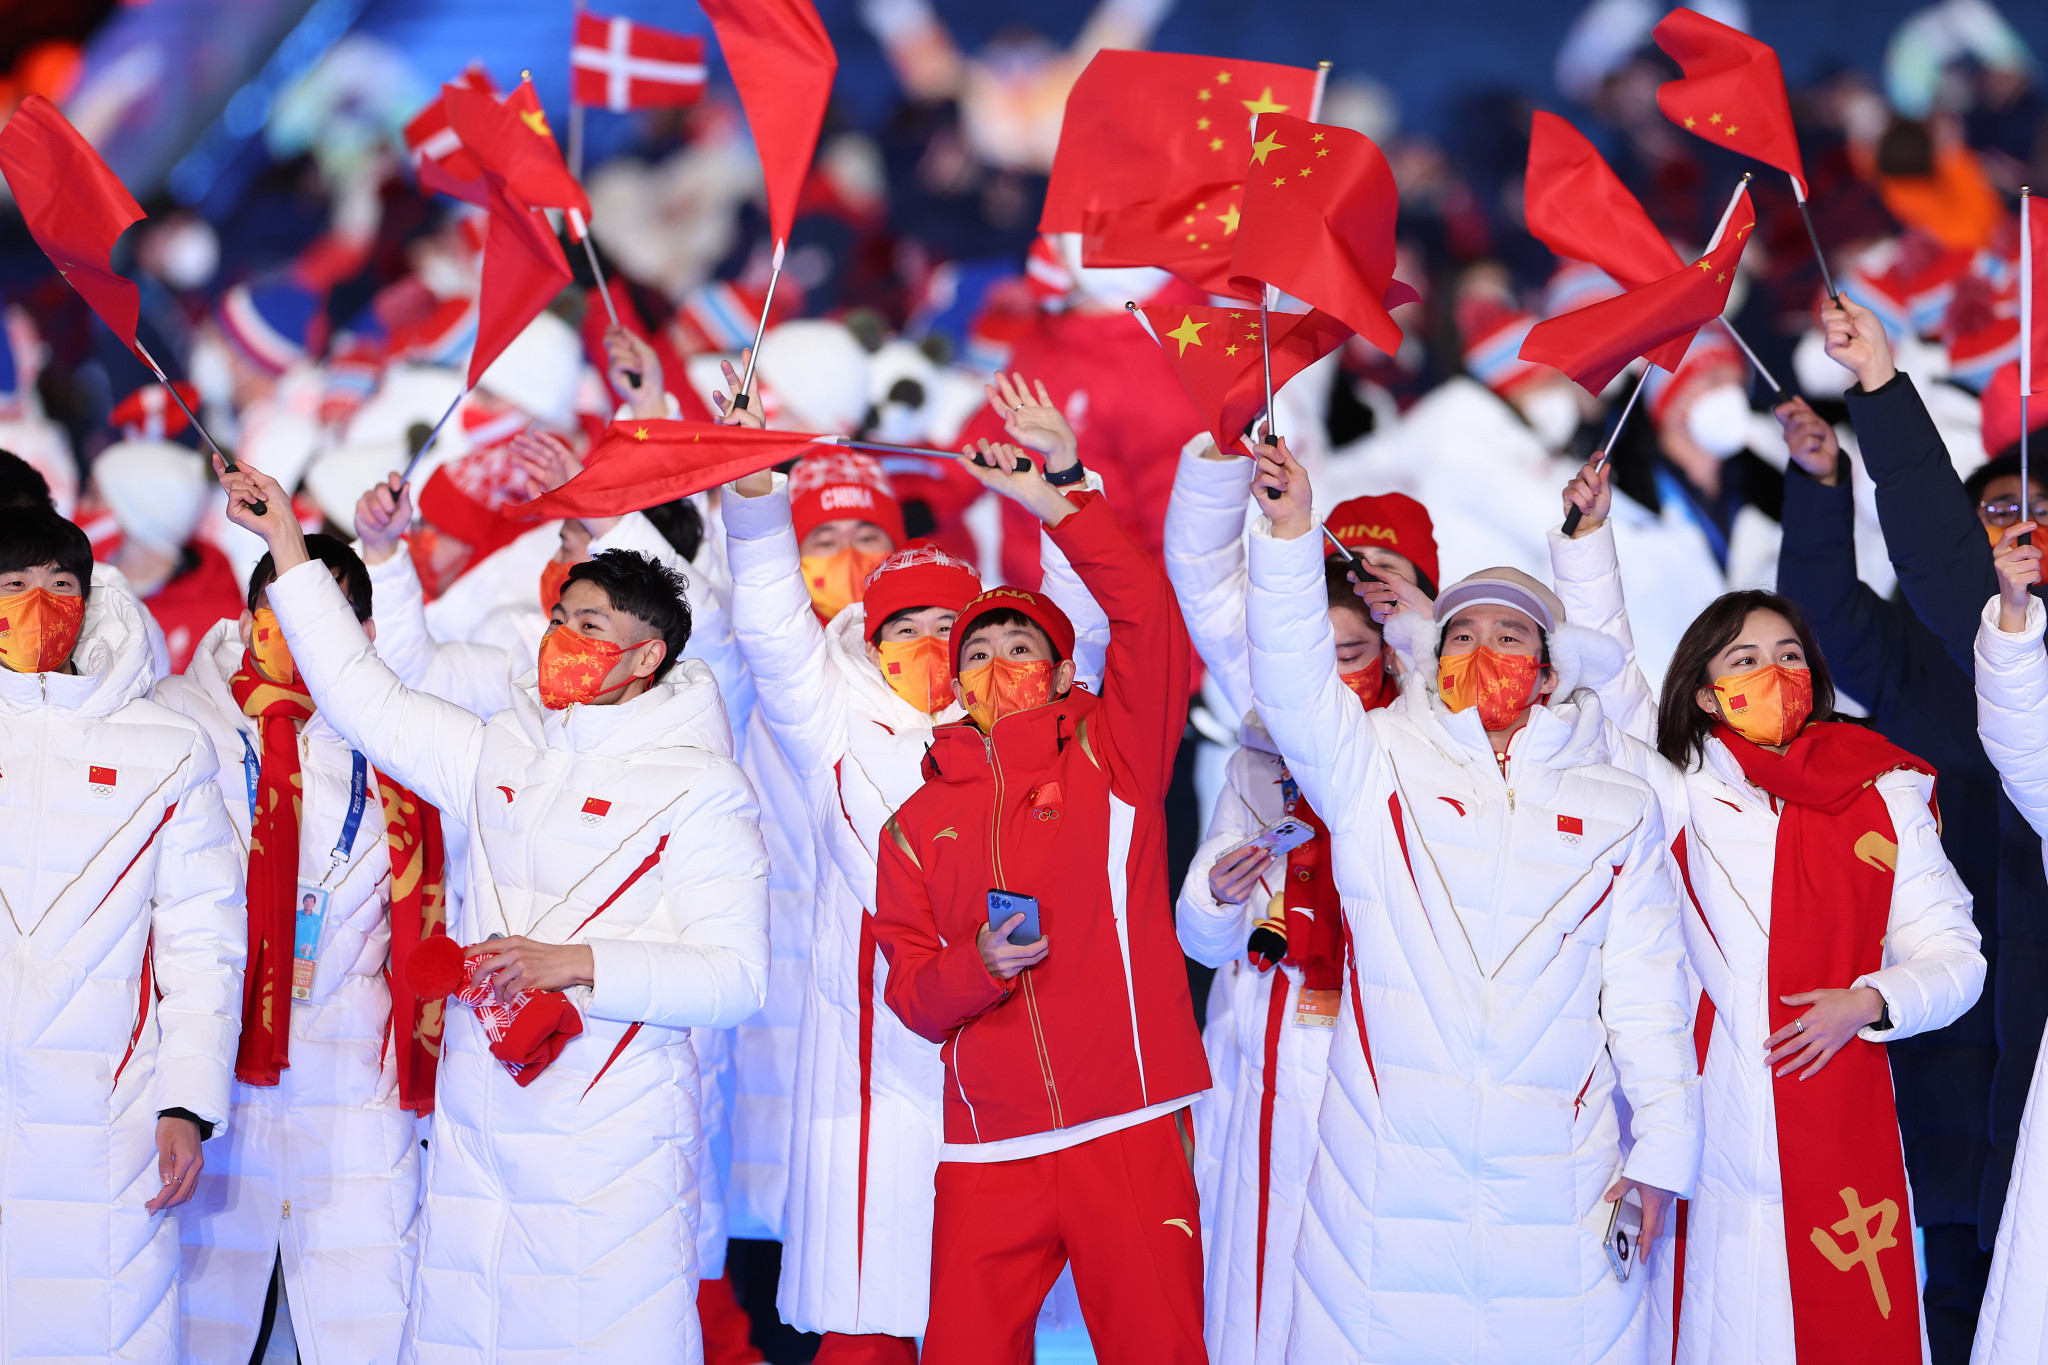 The athletes paraded together as is traditional in the Closing Ceremony ©Getty Images